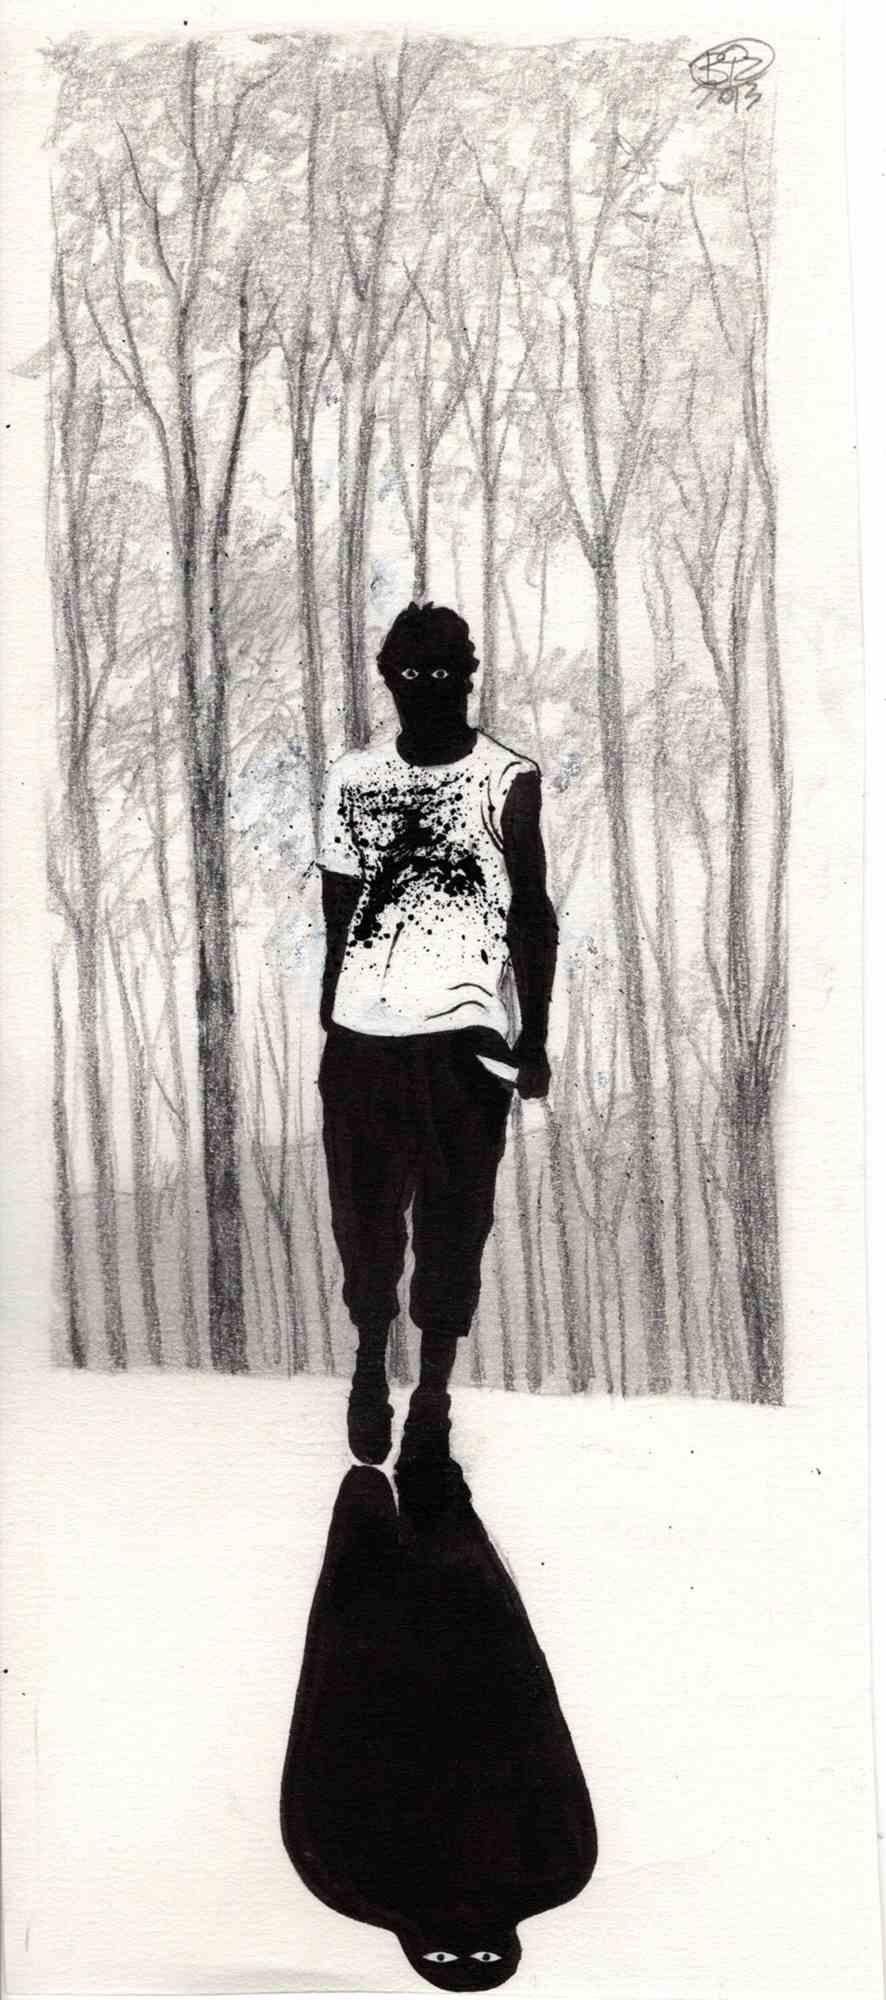 This work entitled "Murderer in the woods" was realized by Vincenzo Bizzarri in 2013 with ink and pencil on rough paper 200gr (21x9cm). It is part of a series of illustrations made for a storybook. The condition of the work is good and may have